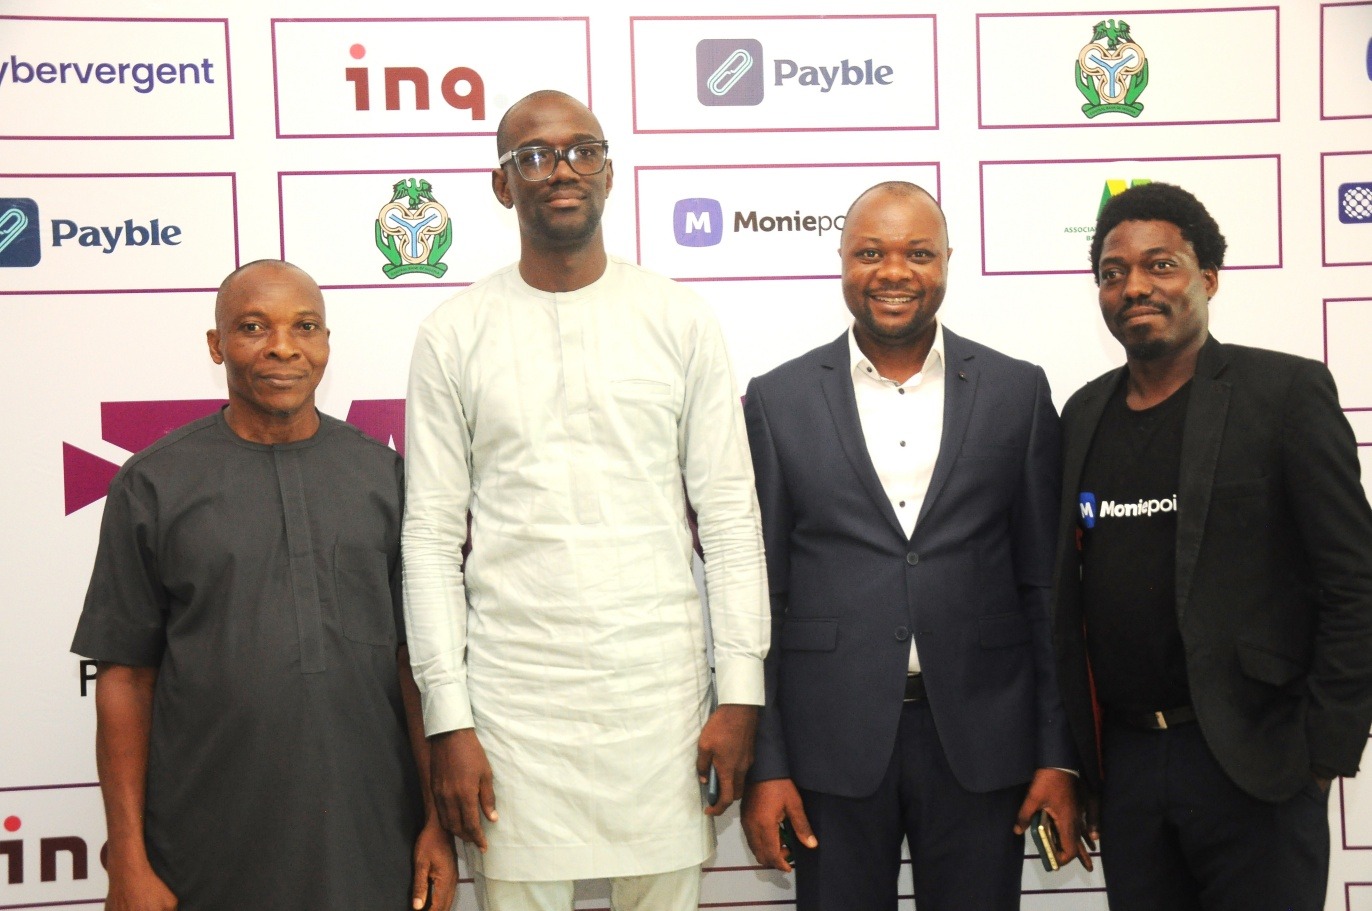 L-r: Chike Onwuegbuchi, co-founder, TechCastle Foundation; Efemena Ogie, Head, Partnership, Moniepoint Inc.; Peter Oluka, Editor, Techeconomy, and Bemigho Awala, PR Manager for MoniePoint Inc, during, the Payments Forum Nigeria (PAFON 1.0) event on, ‘Payments: Trust, Security and Privacy in AI era’ held in Lagos recently.